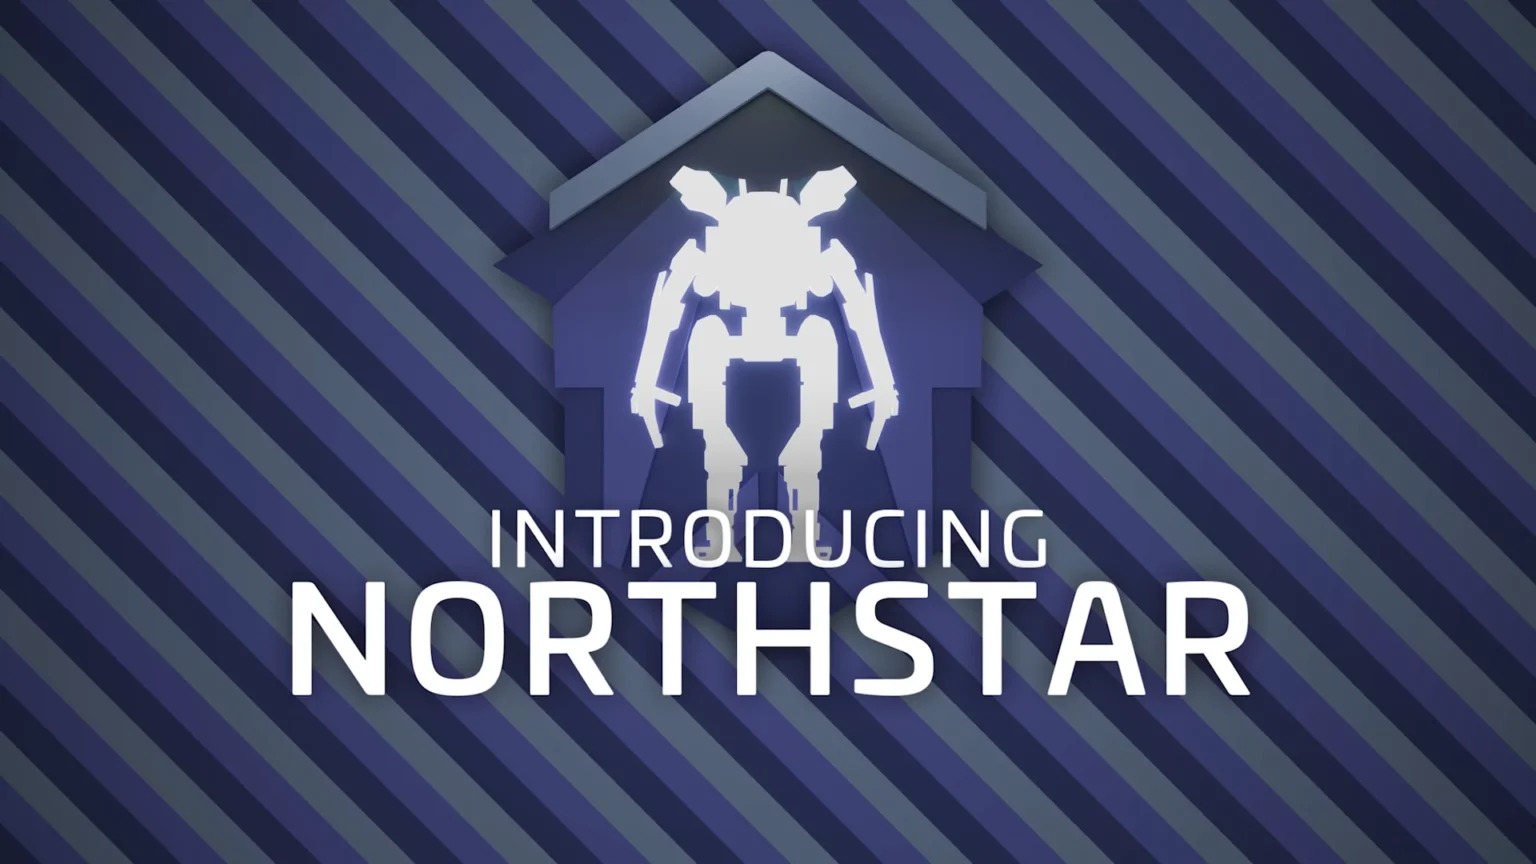 Northstar is a mod client that allowed the creation of custom multiplayer servers for Titanfall 2